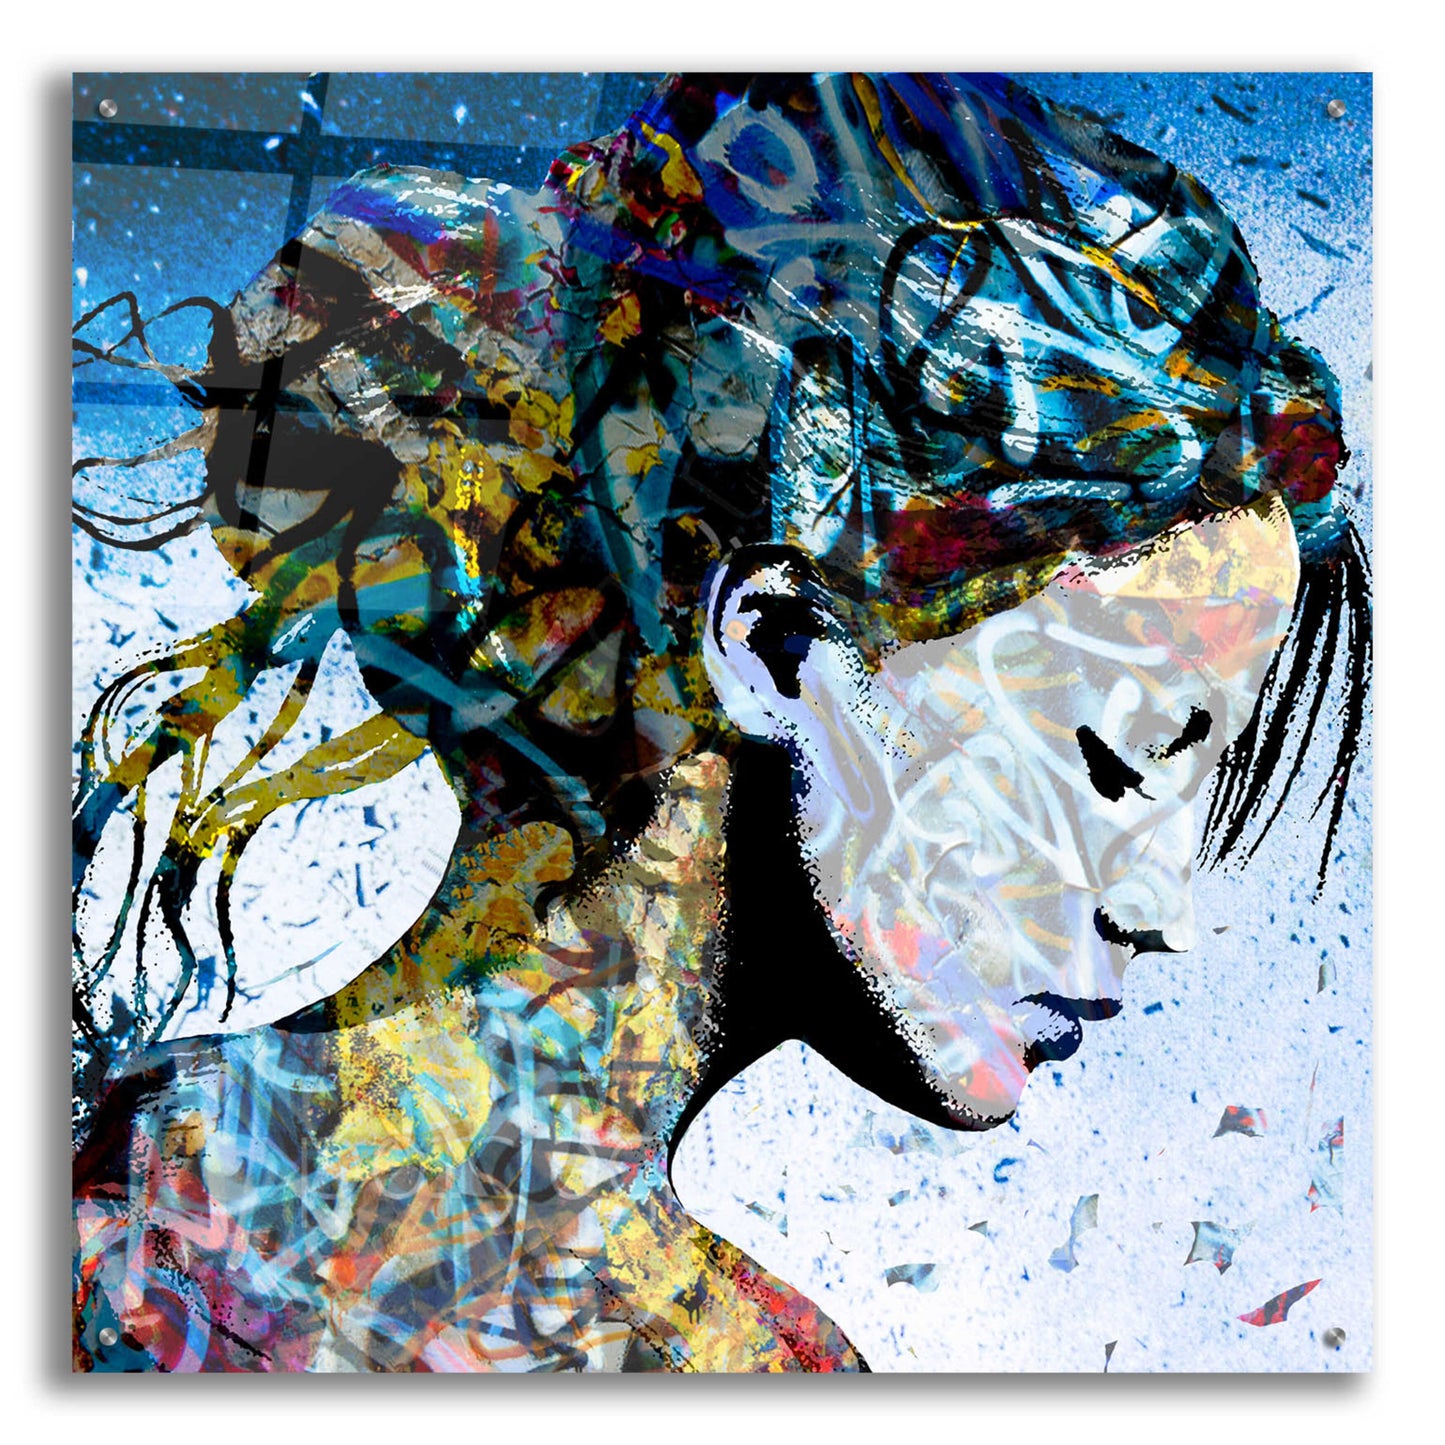 Epic Art 'THE MODEST GIRL' by DB Waterman,36x36